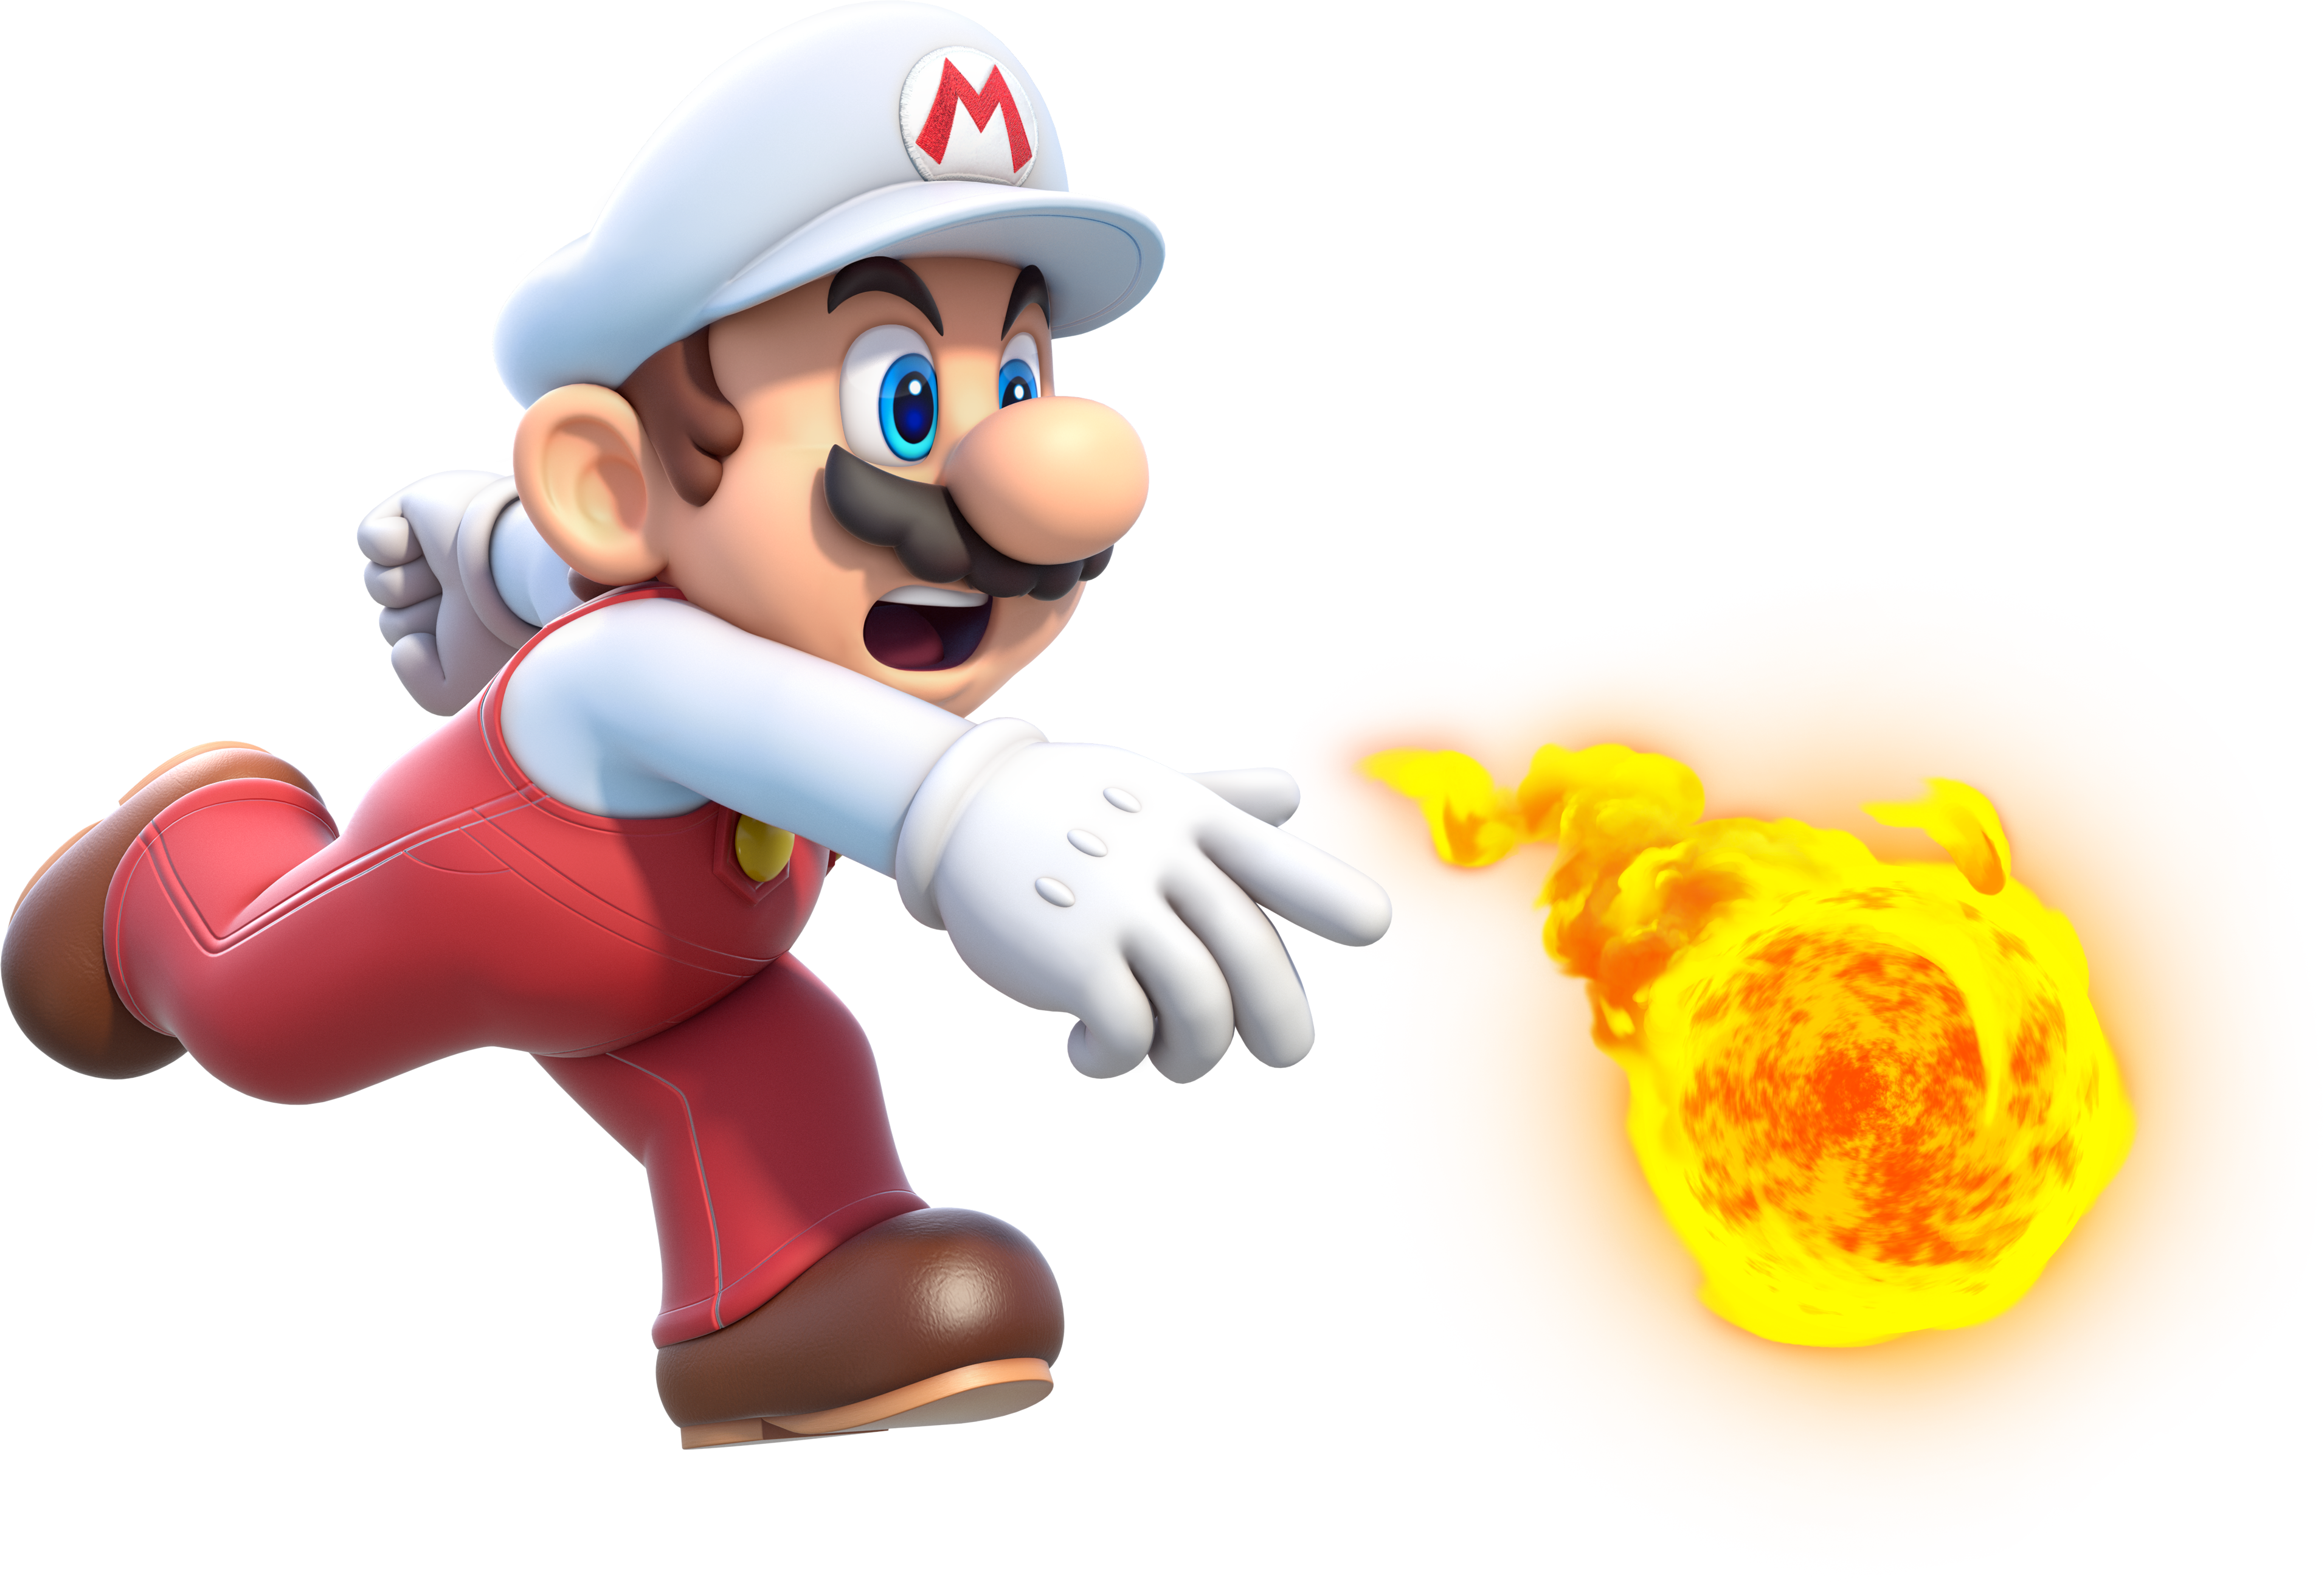 Planned All Along Top Power Ups In The Mario Series - Super Mario 3d World Fire Mario (3822x2606)